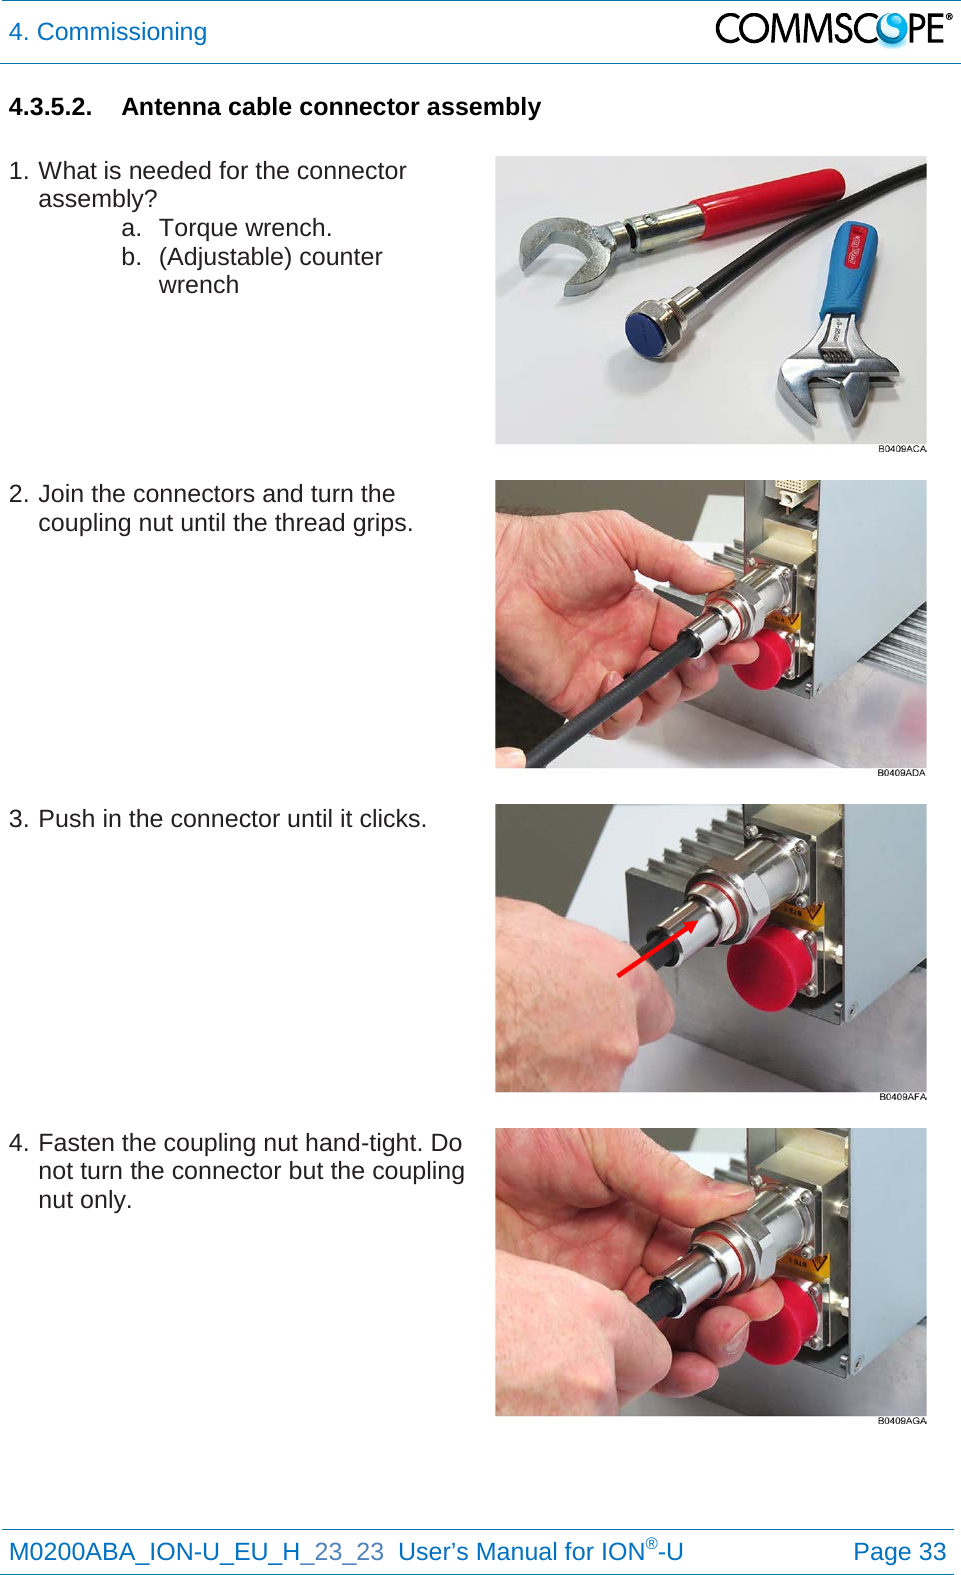 4. Commissioning   M0200ABA_ION-U_EU_H_23_23  User’s Manual for ION®-U  Page 33  4.3.5.2. Antenna cable connector assembly  1. What is needed for the connector assembly? a. Torque wrench. b. (Adjustable) counter wrench    2. Join the connectors and turn the coupling nut until the thread grips.    3. Push in the connector until it clicks.    4. Fasten the coupling nut hand-tight. Do not turn the connector but the coupling nut only.      